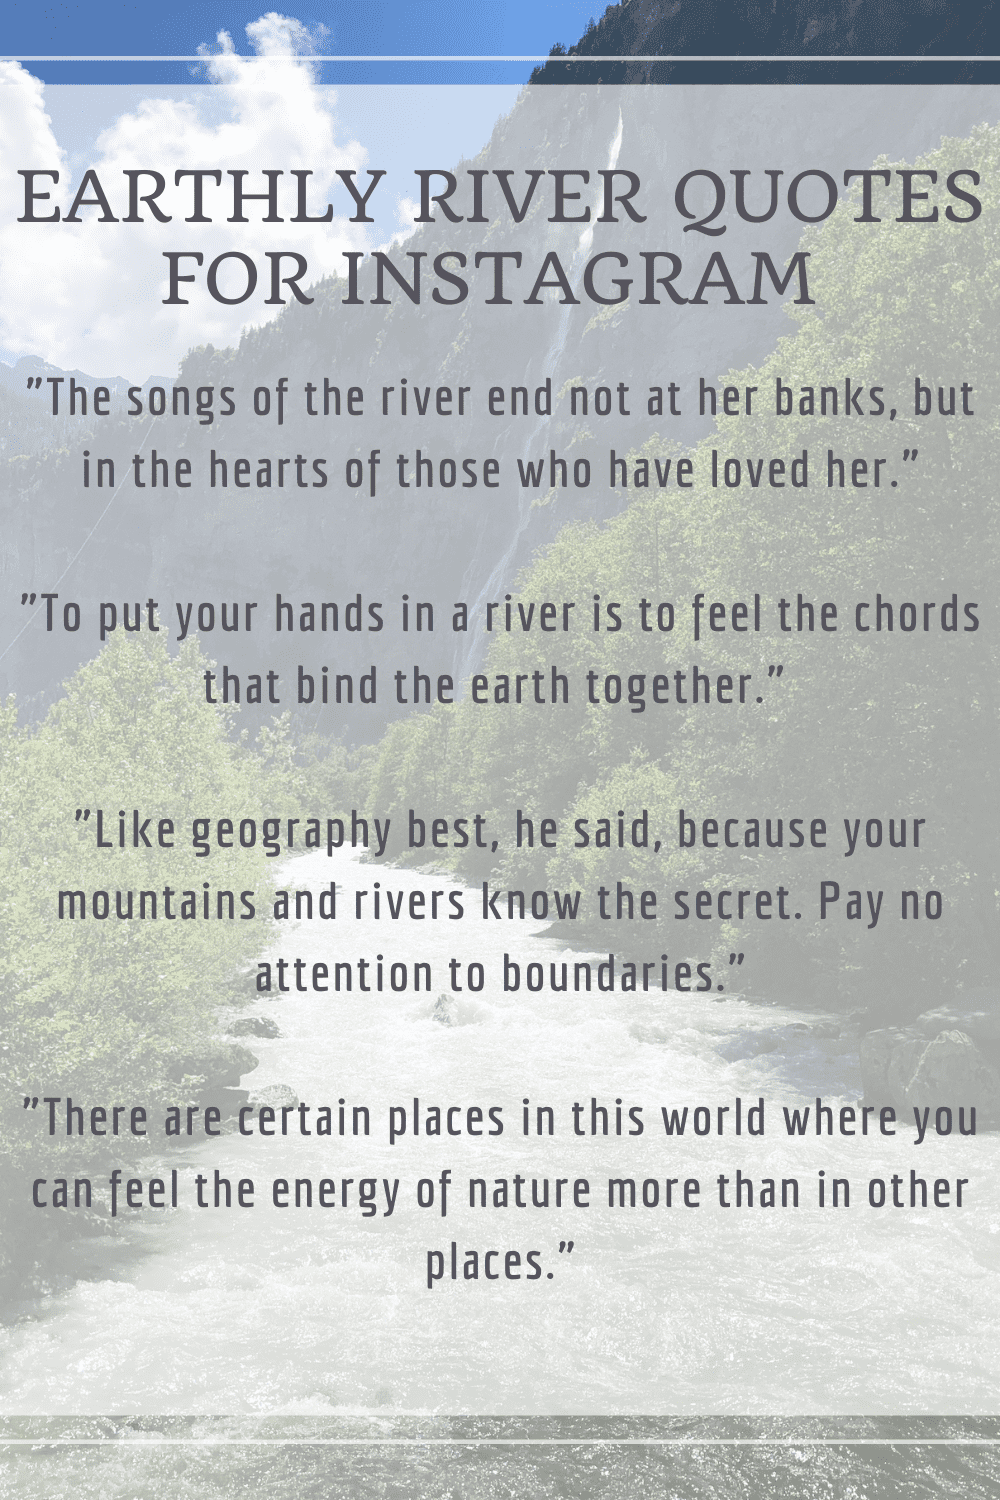 Earthly River Quotes for Instagram 